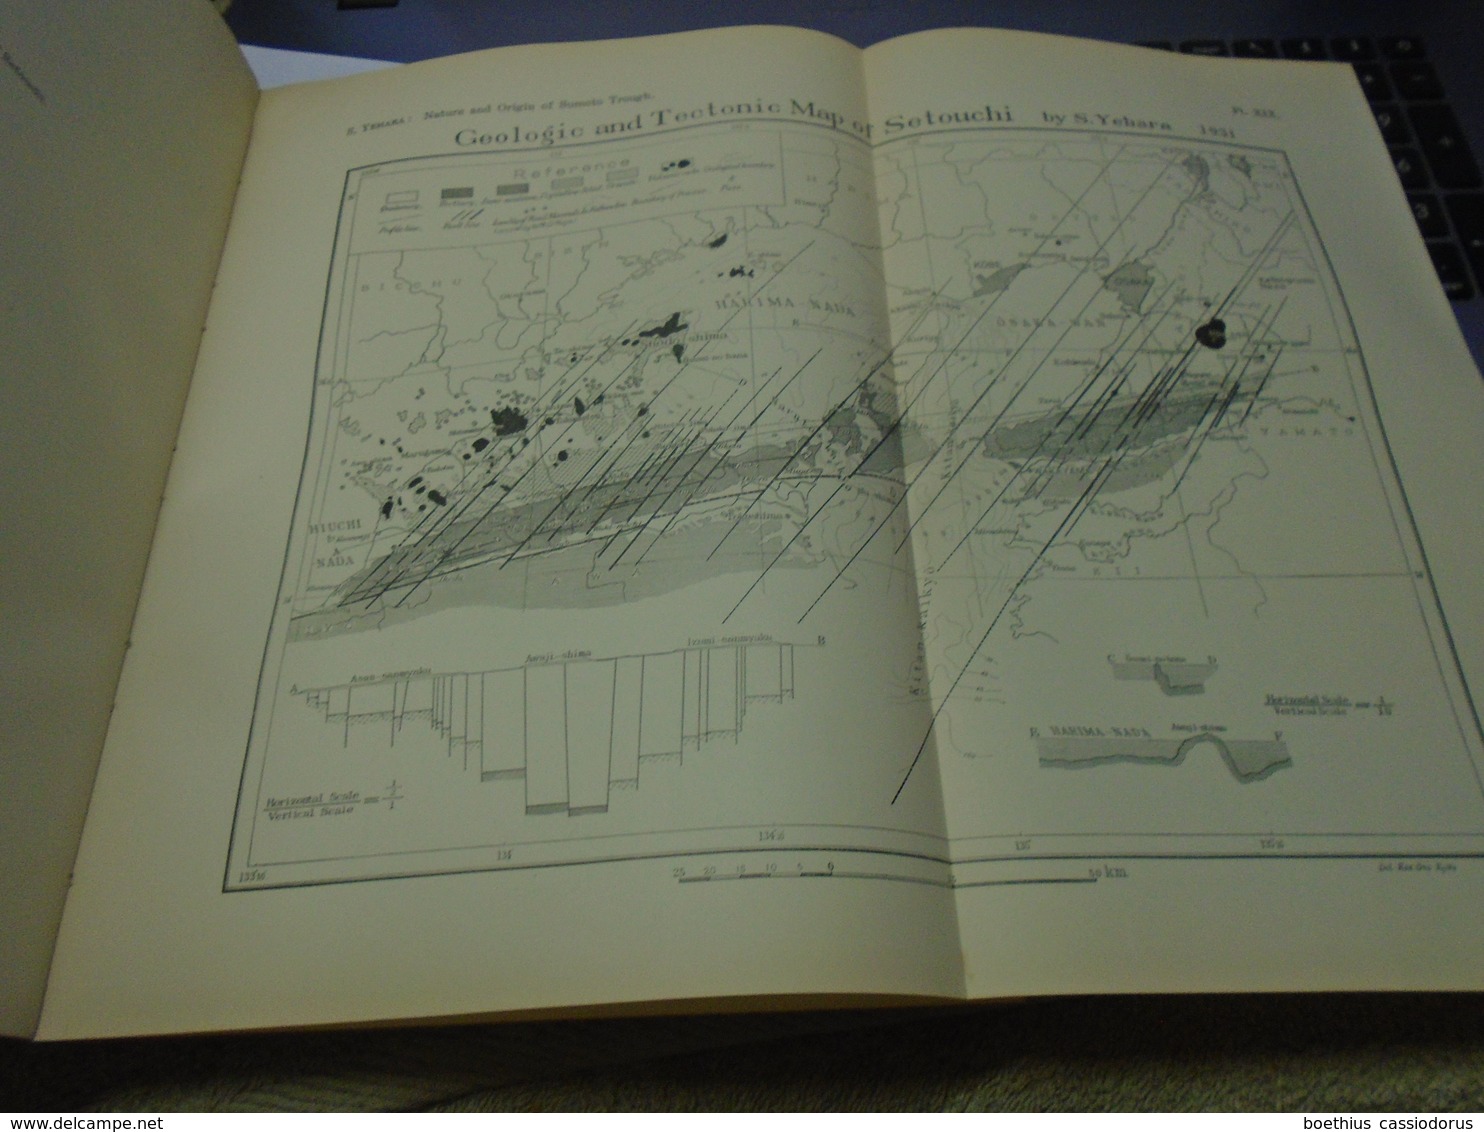 JAPANESE JOURNAL OF GEOLOGY AND GEOGRAPHY Transactions And Abstracts Vol. IX  Nos. 3 And 4 TOKYO March,1932 - Sciences De La Terre